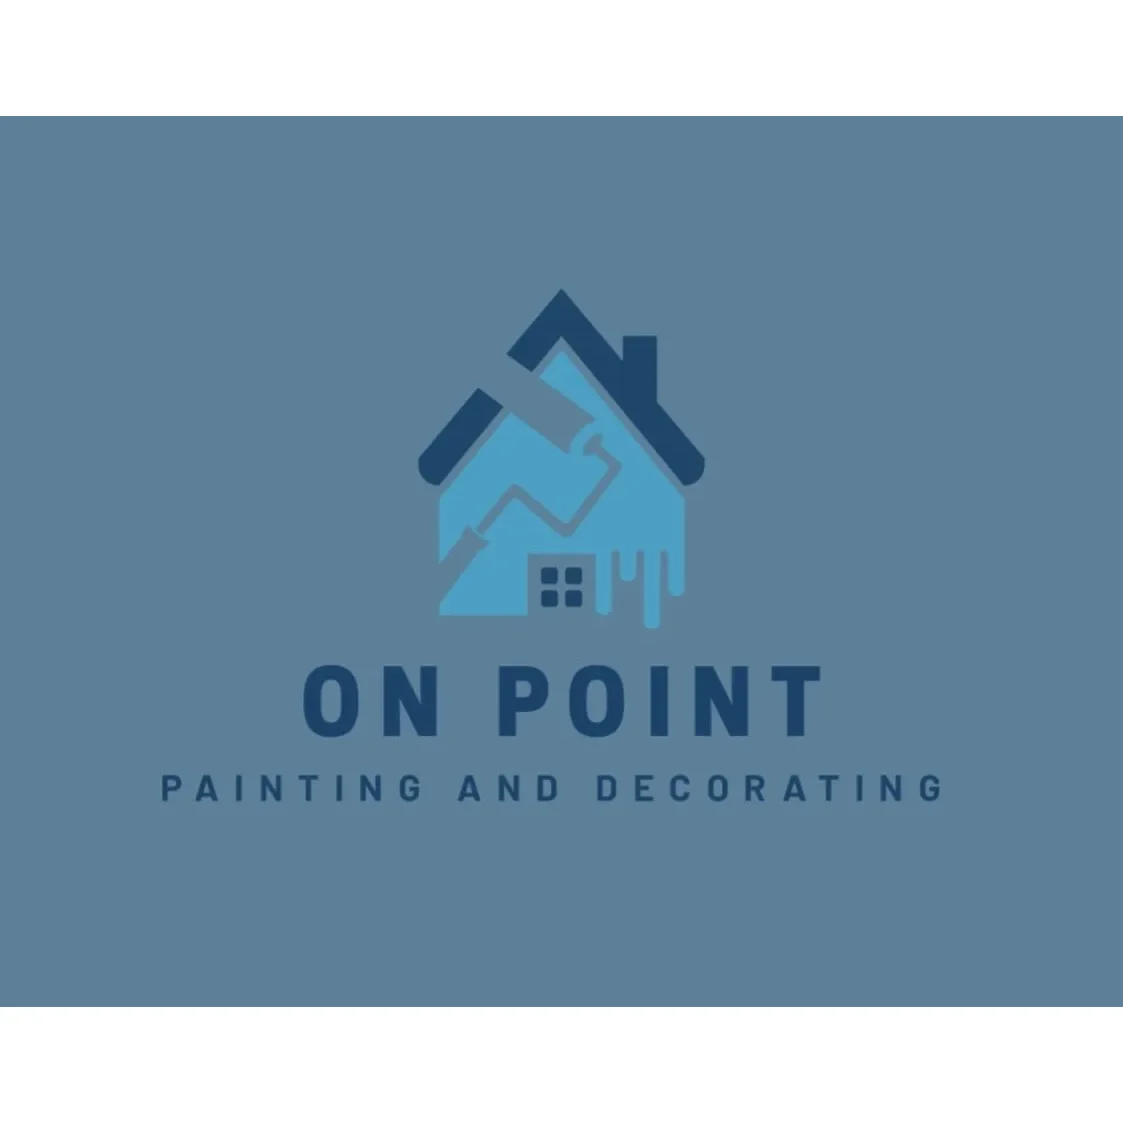 LOGO On Point Painting And Decorating Ltd Thornton-Cleveleys 07368 321260